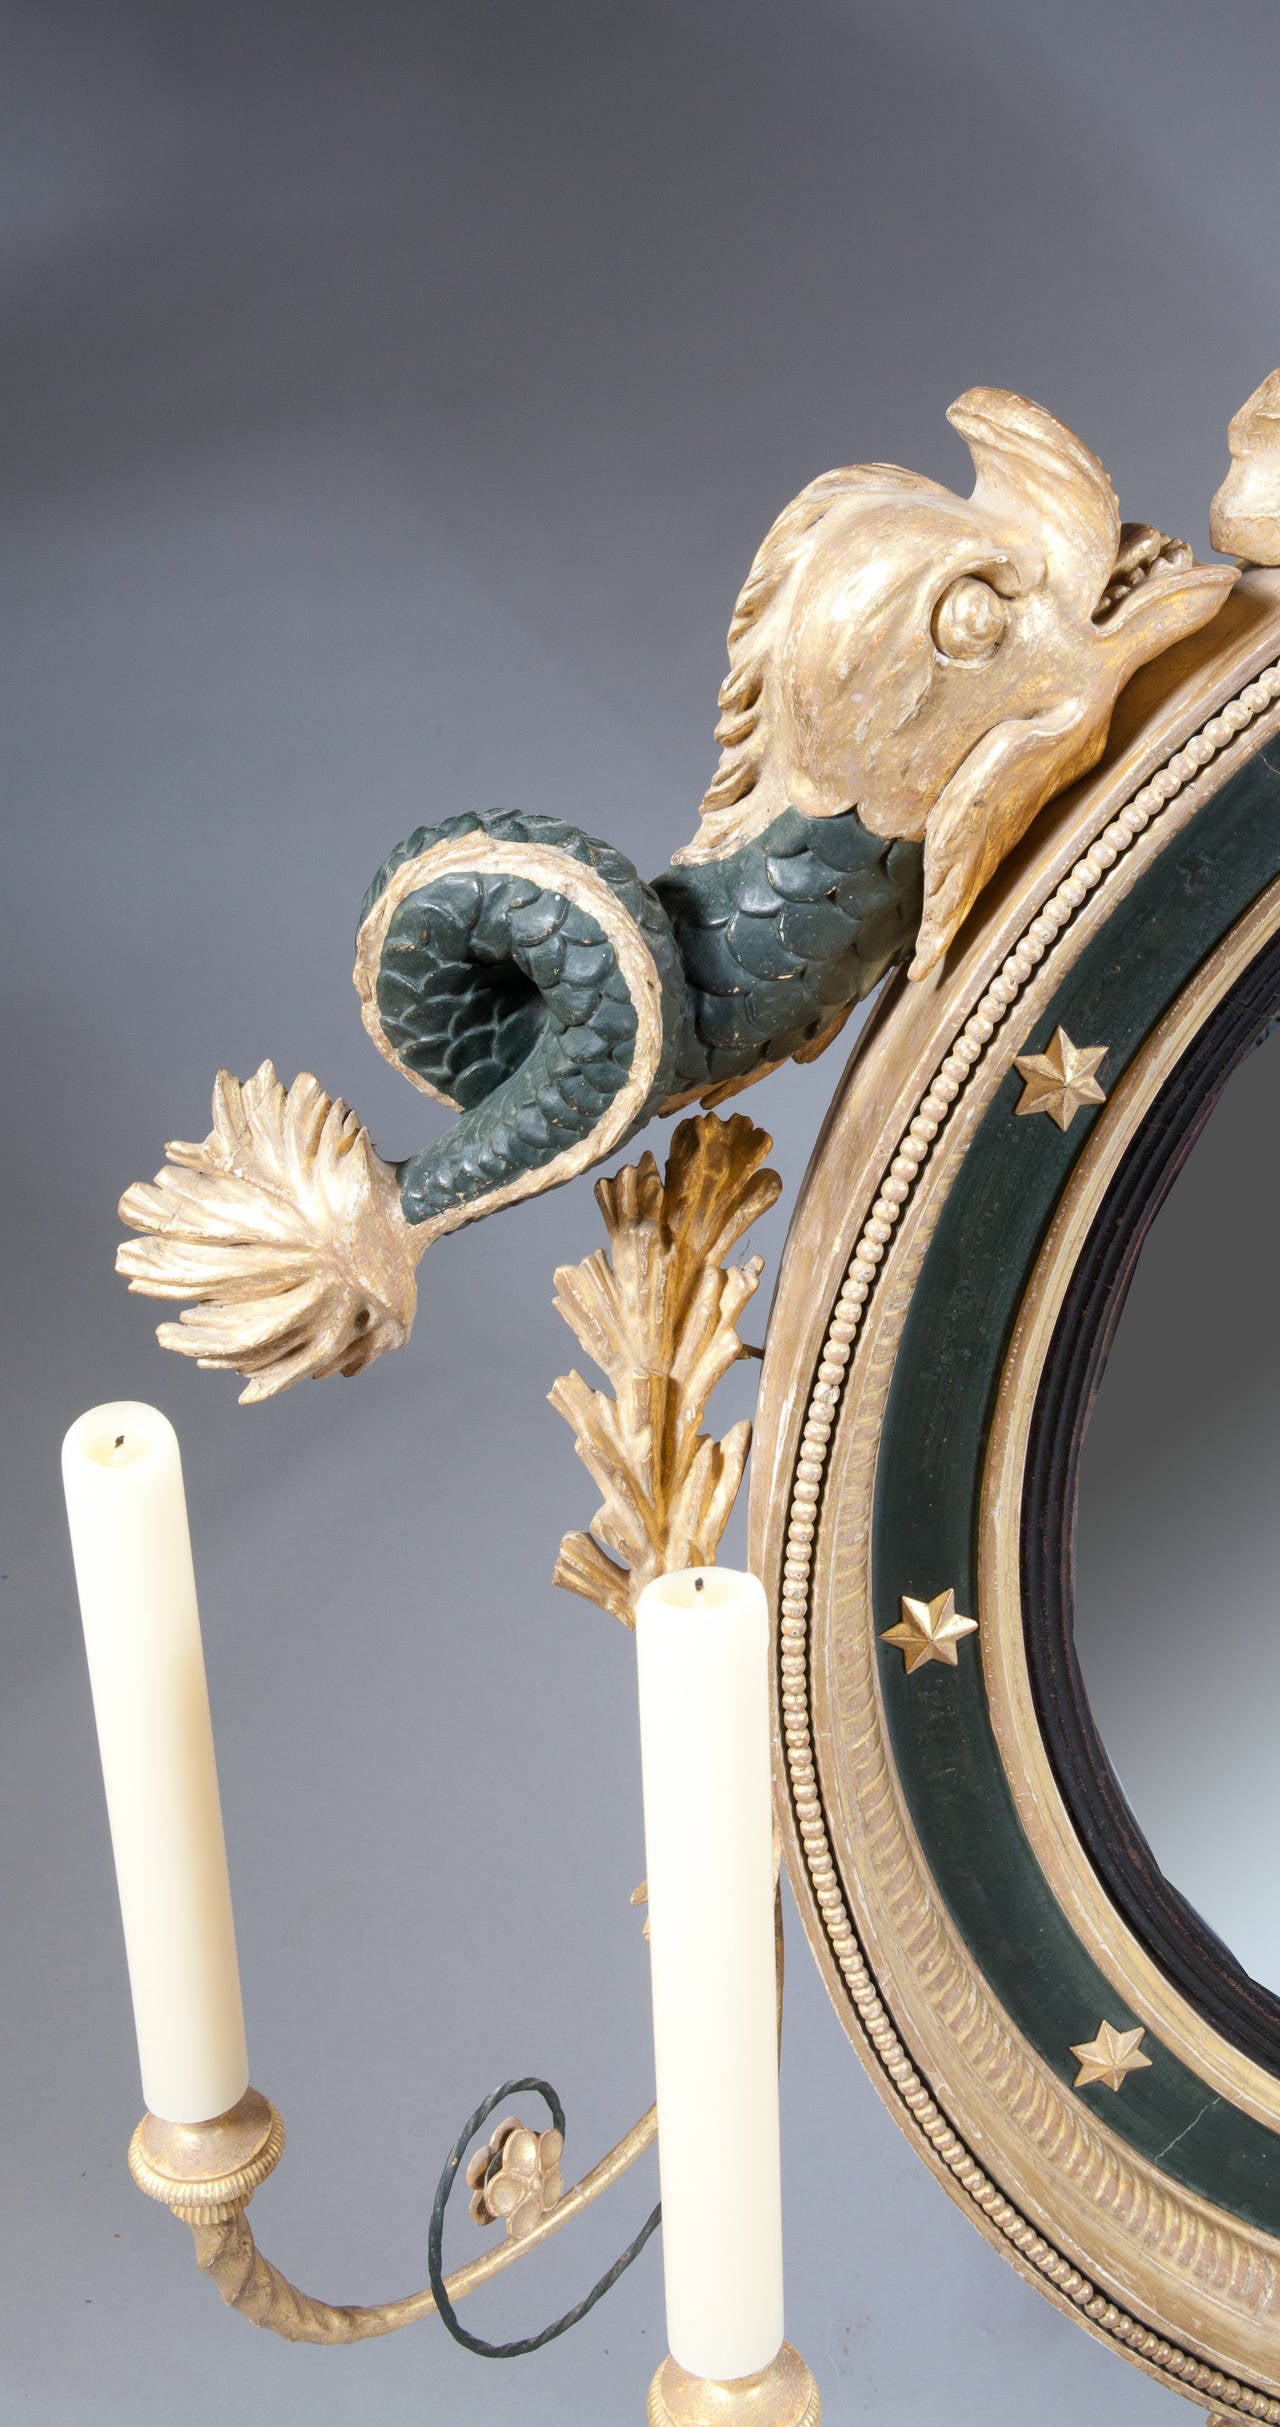 A large scale early 19th century Regency convex mirror.